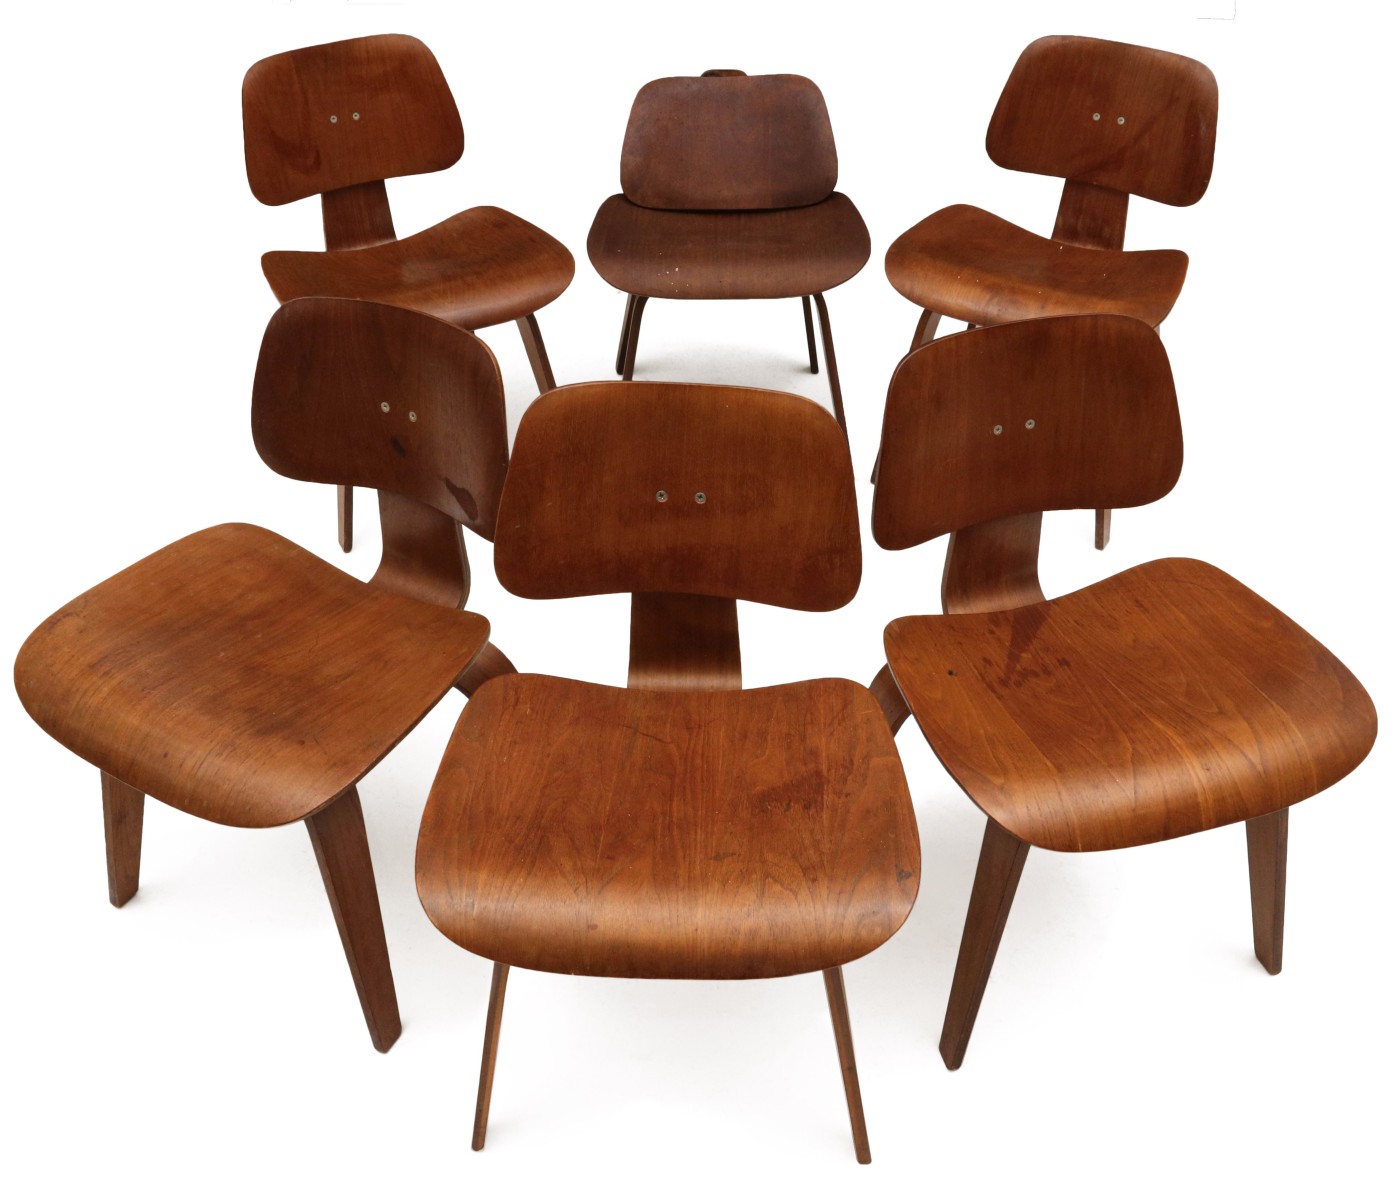 HERMAN MILLER DCW MOLDED PLYWOOD CHAIRS - AS FOUND